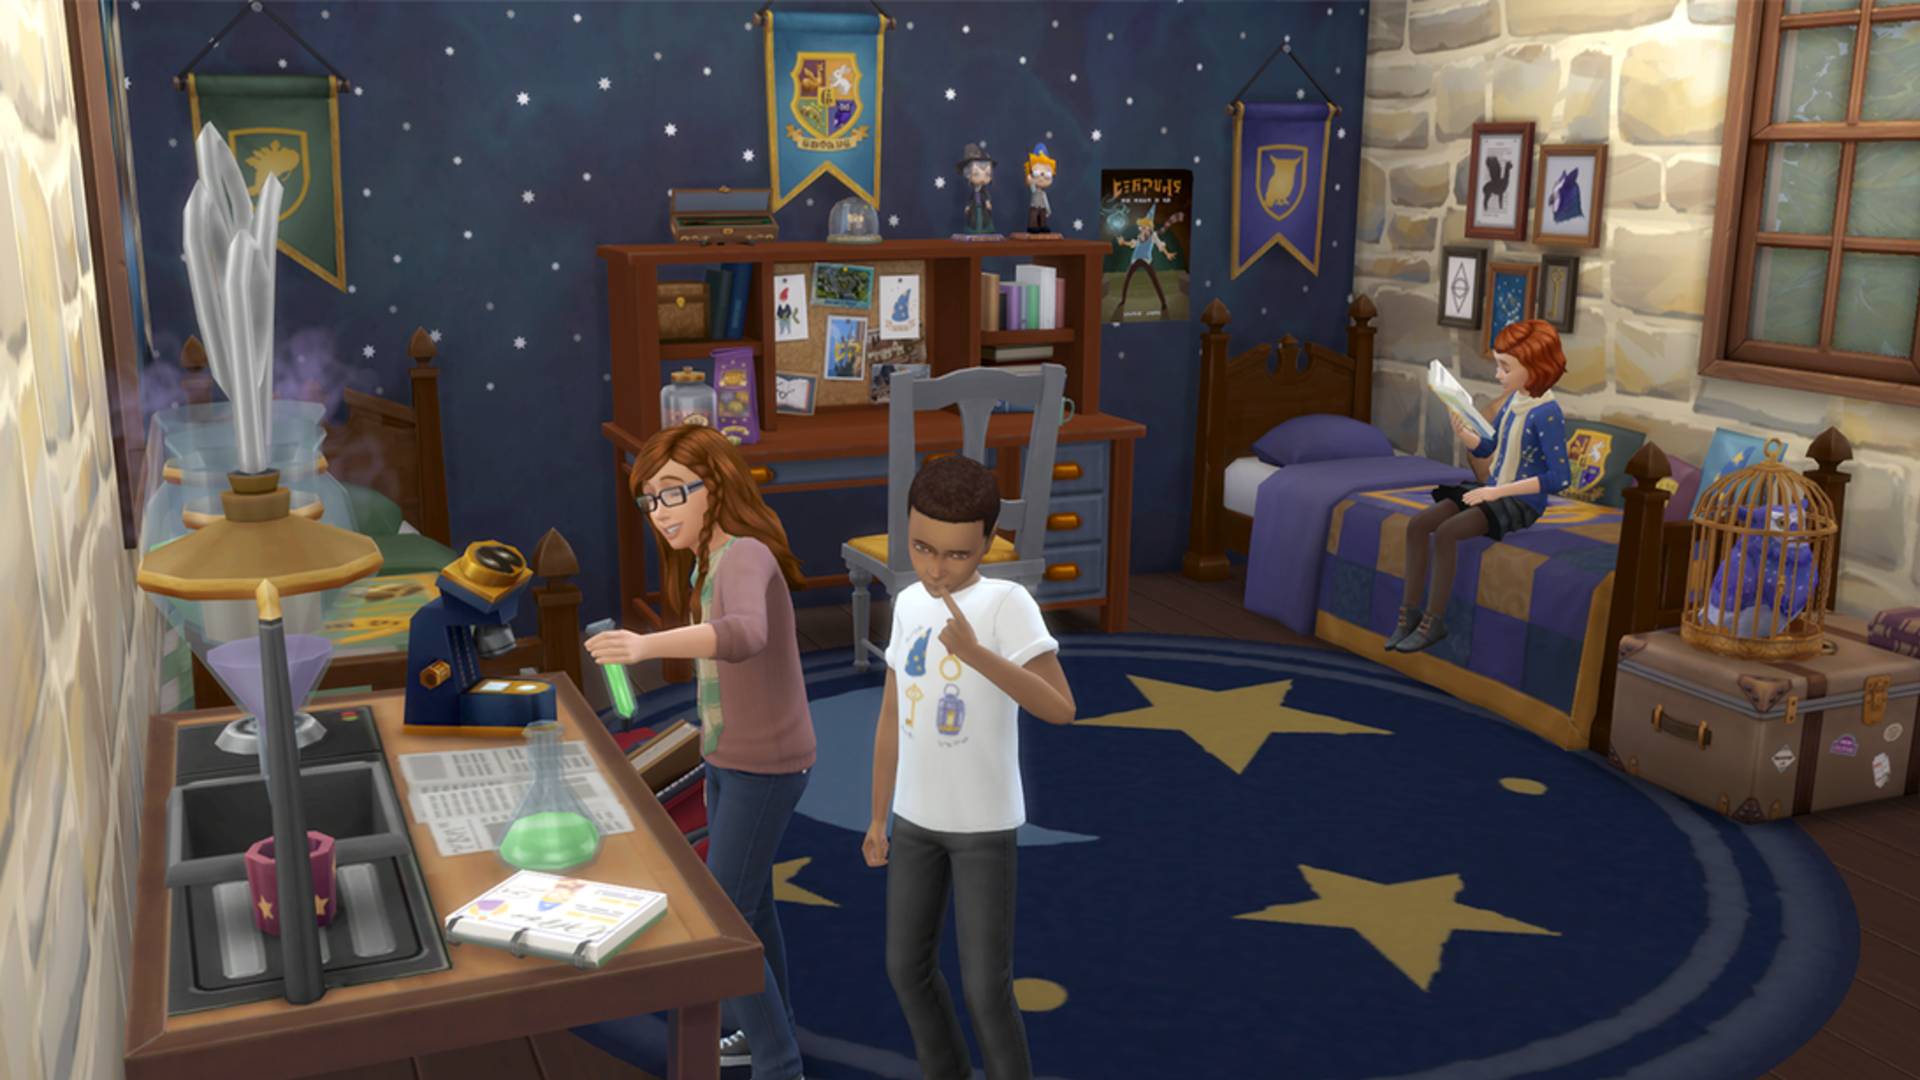 Sims 4 CC: Children's bedroom, furnished with wizard-themed items and decorations, including a banner featuring the Harry Potter coat of arms at Hogwarts.